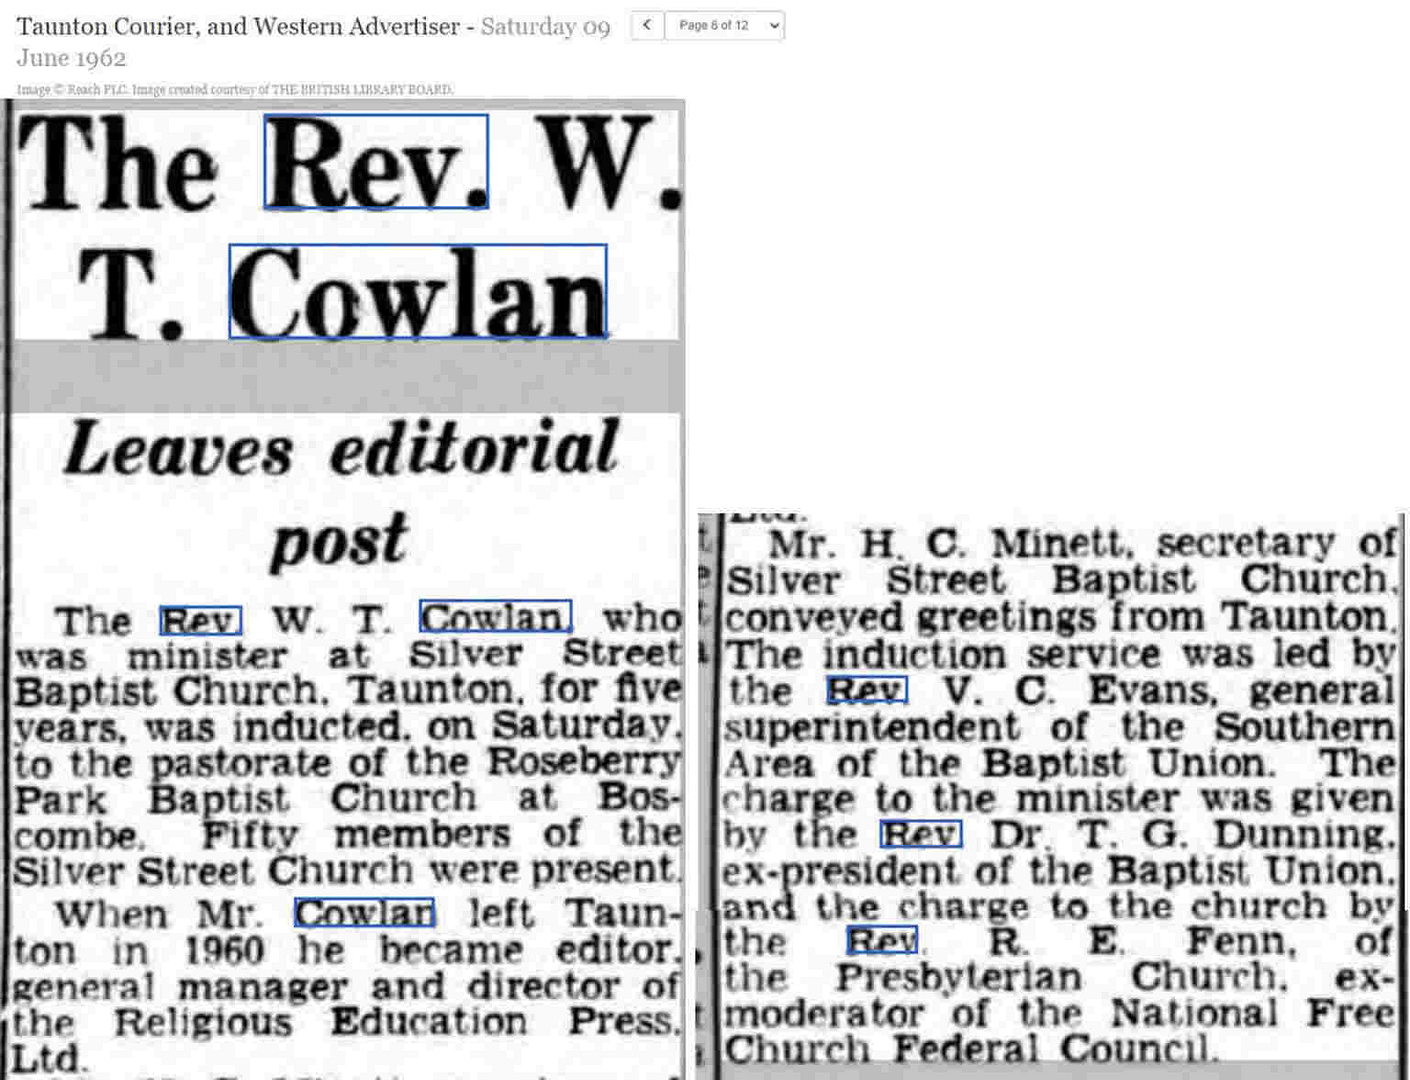 1962 Taunton Courier newspaper article mentioning Rev. Cowlan.